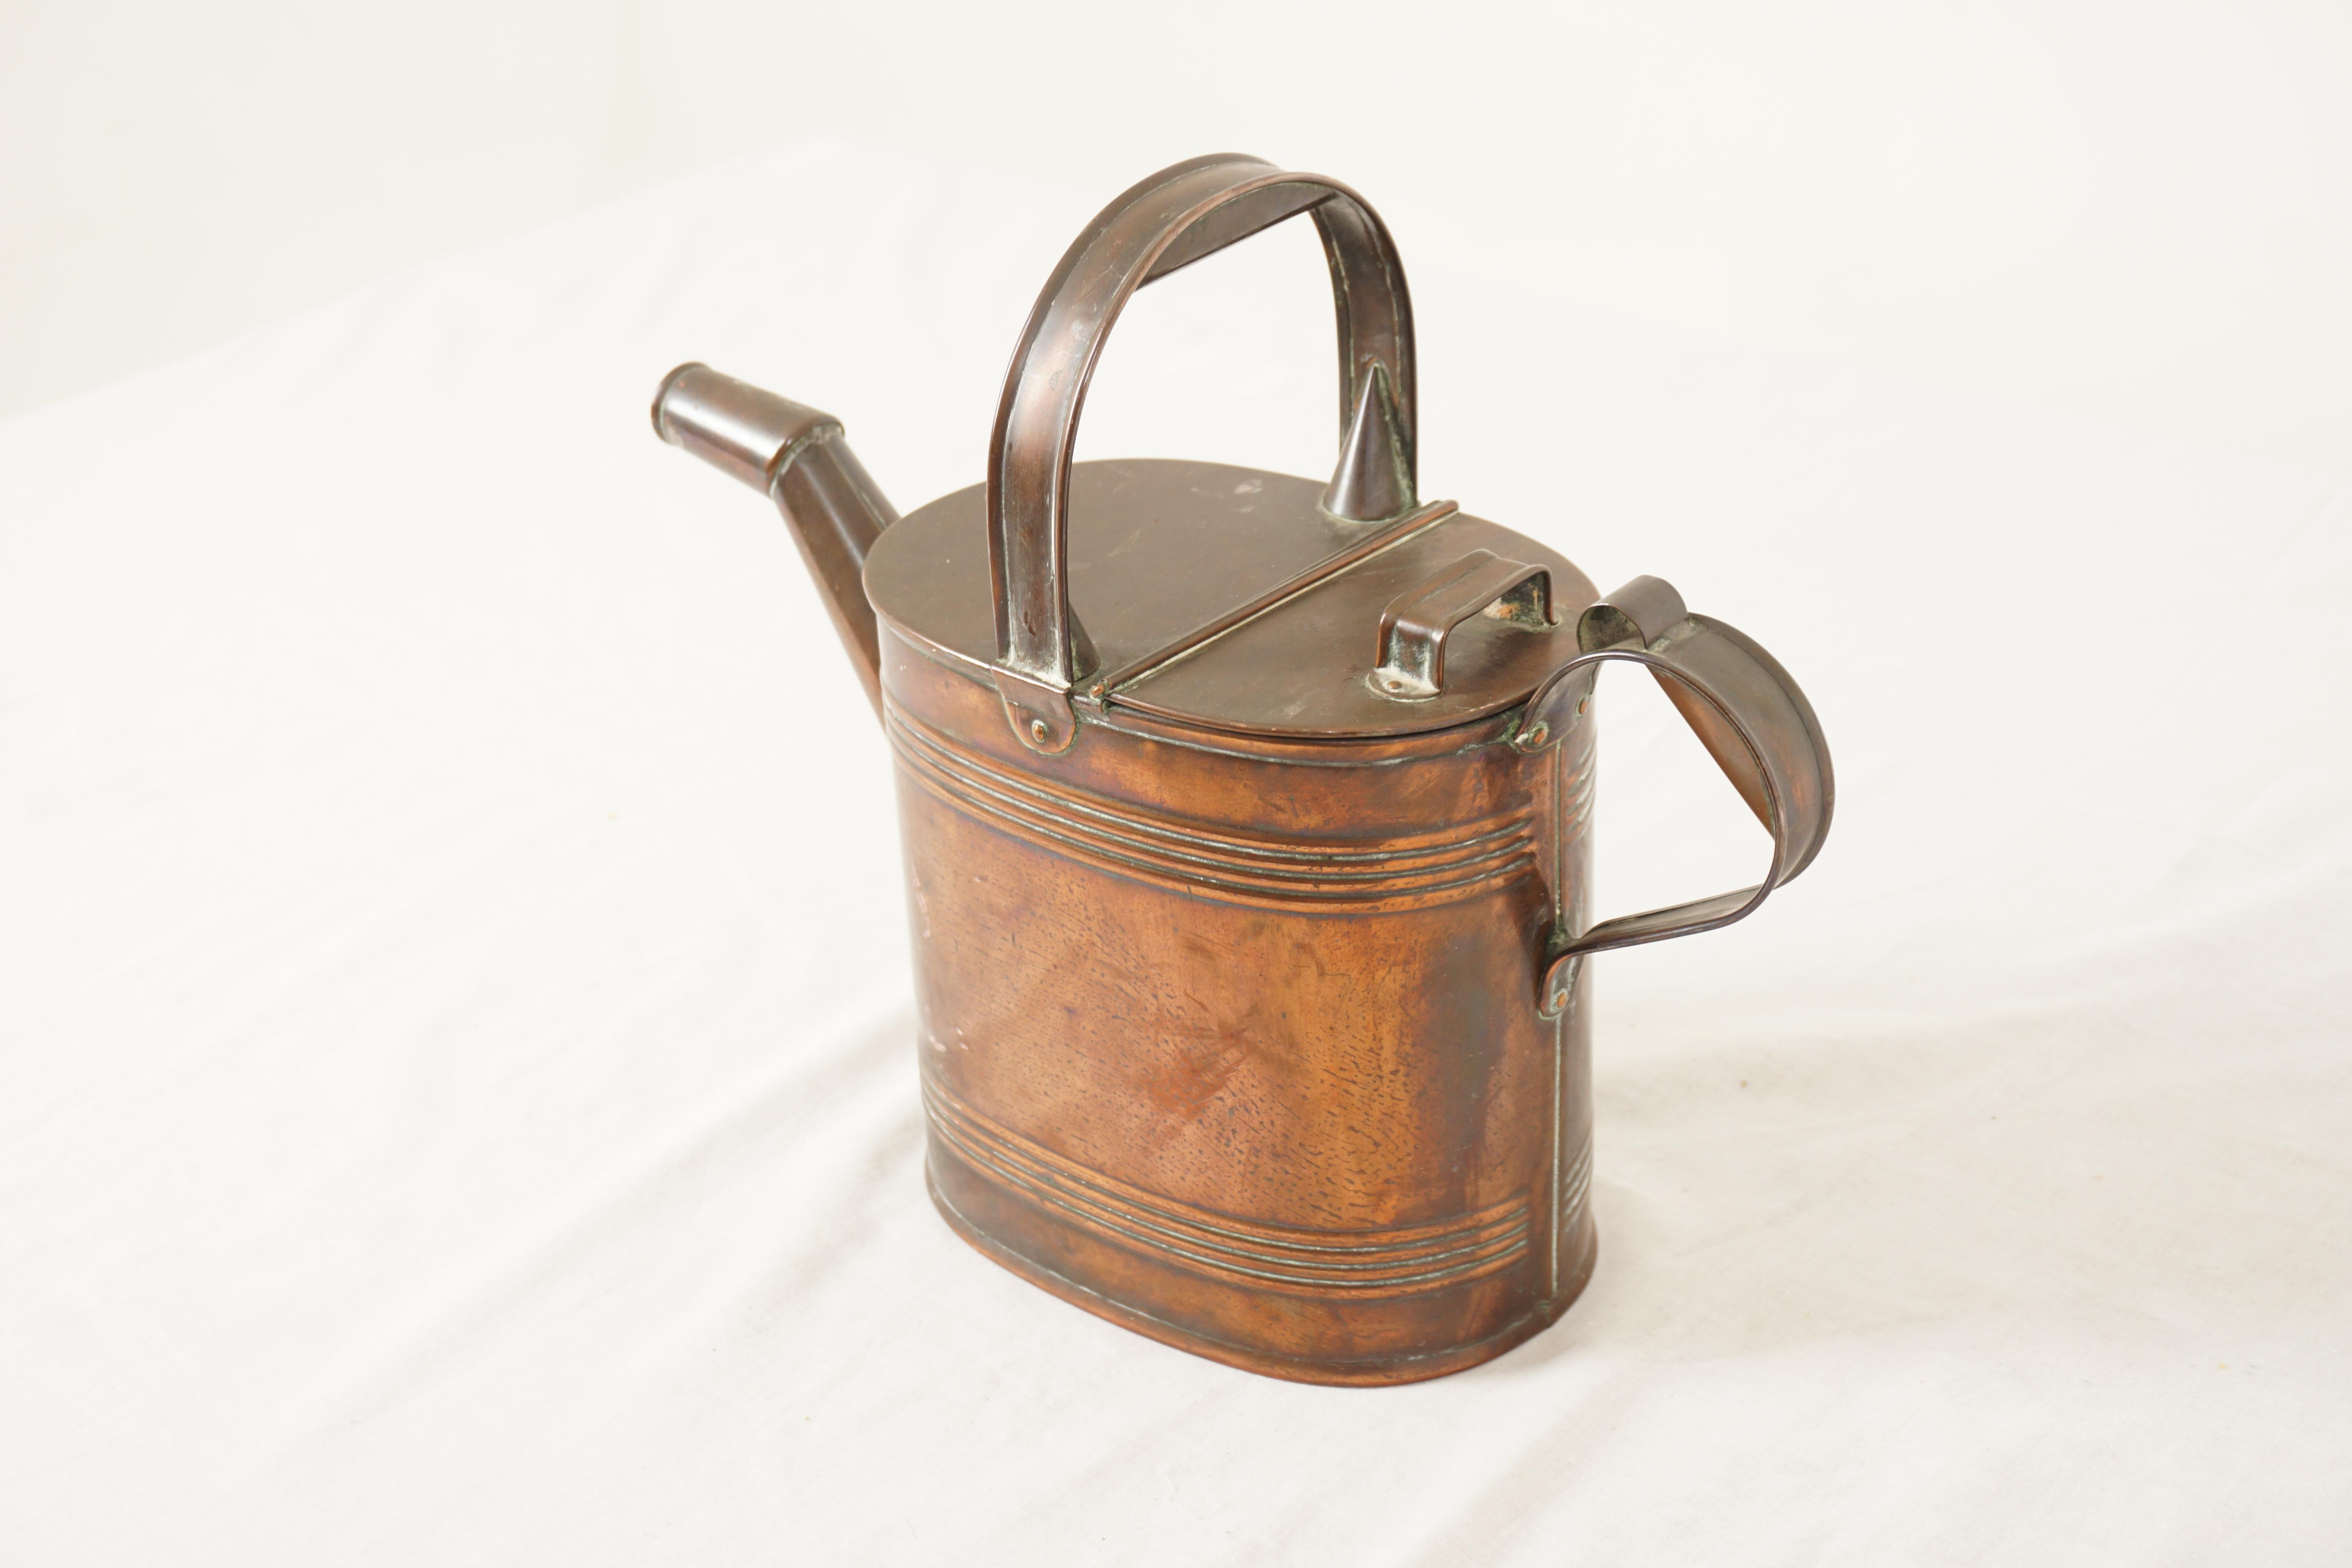 Antique Country Victorian Copper Water Watering Can, Jug with Handle, Scotland 1880, H1129

Scotland 1880
Solid Copper
Original Finish
Rounded top handle
Shaped handle on the end
Lift up lid
Large rounded spout
All in original